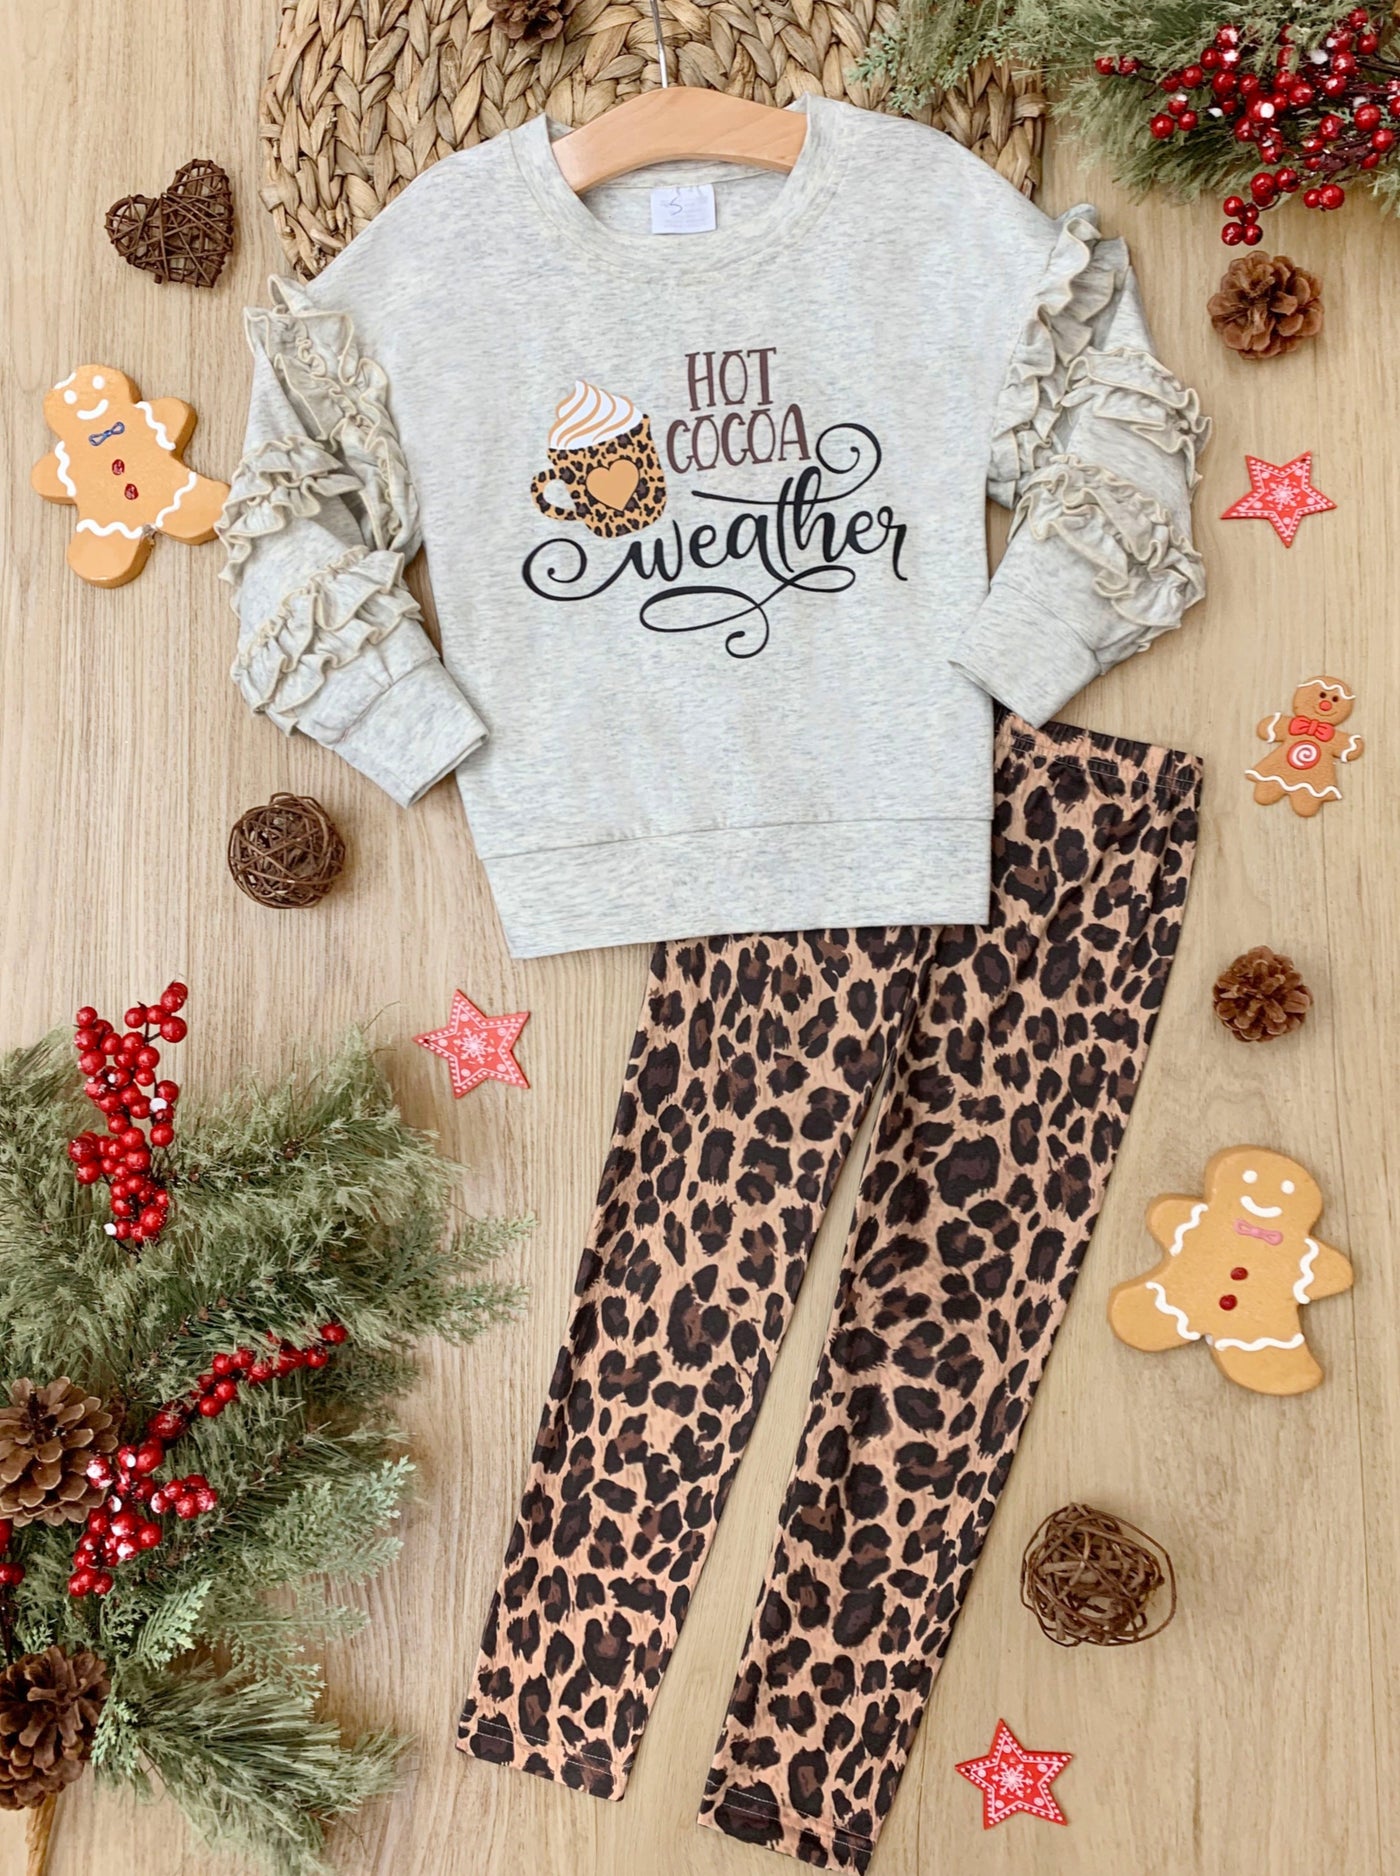 Girls | Mia Weather Casual & Winter Cocoa Leopard – Hot Pullover Set Belle Leggings Girls